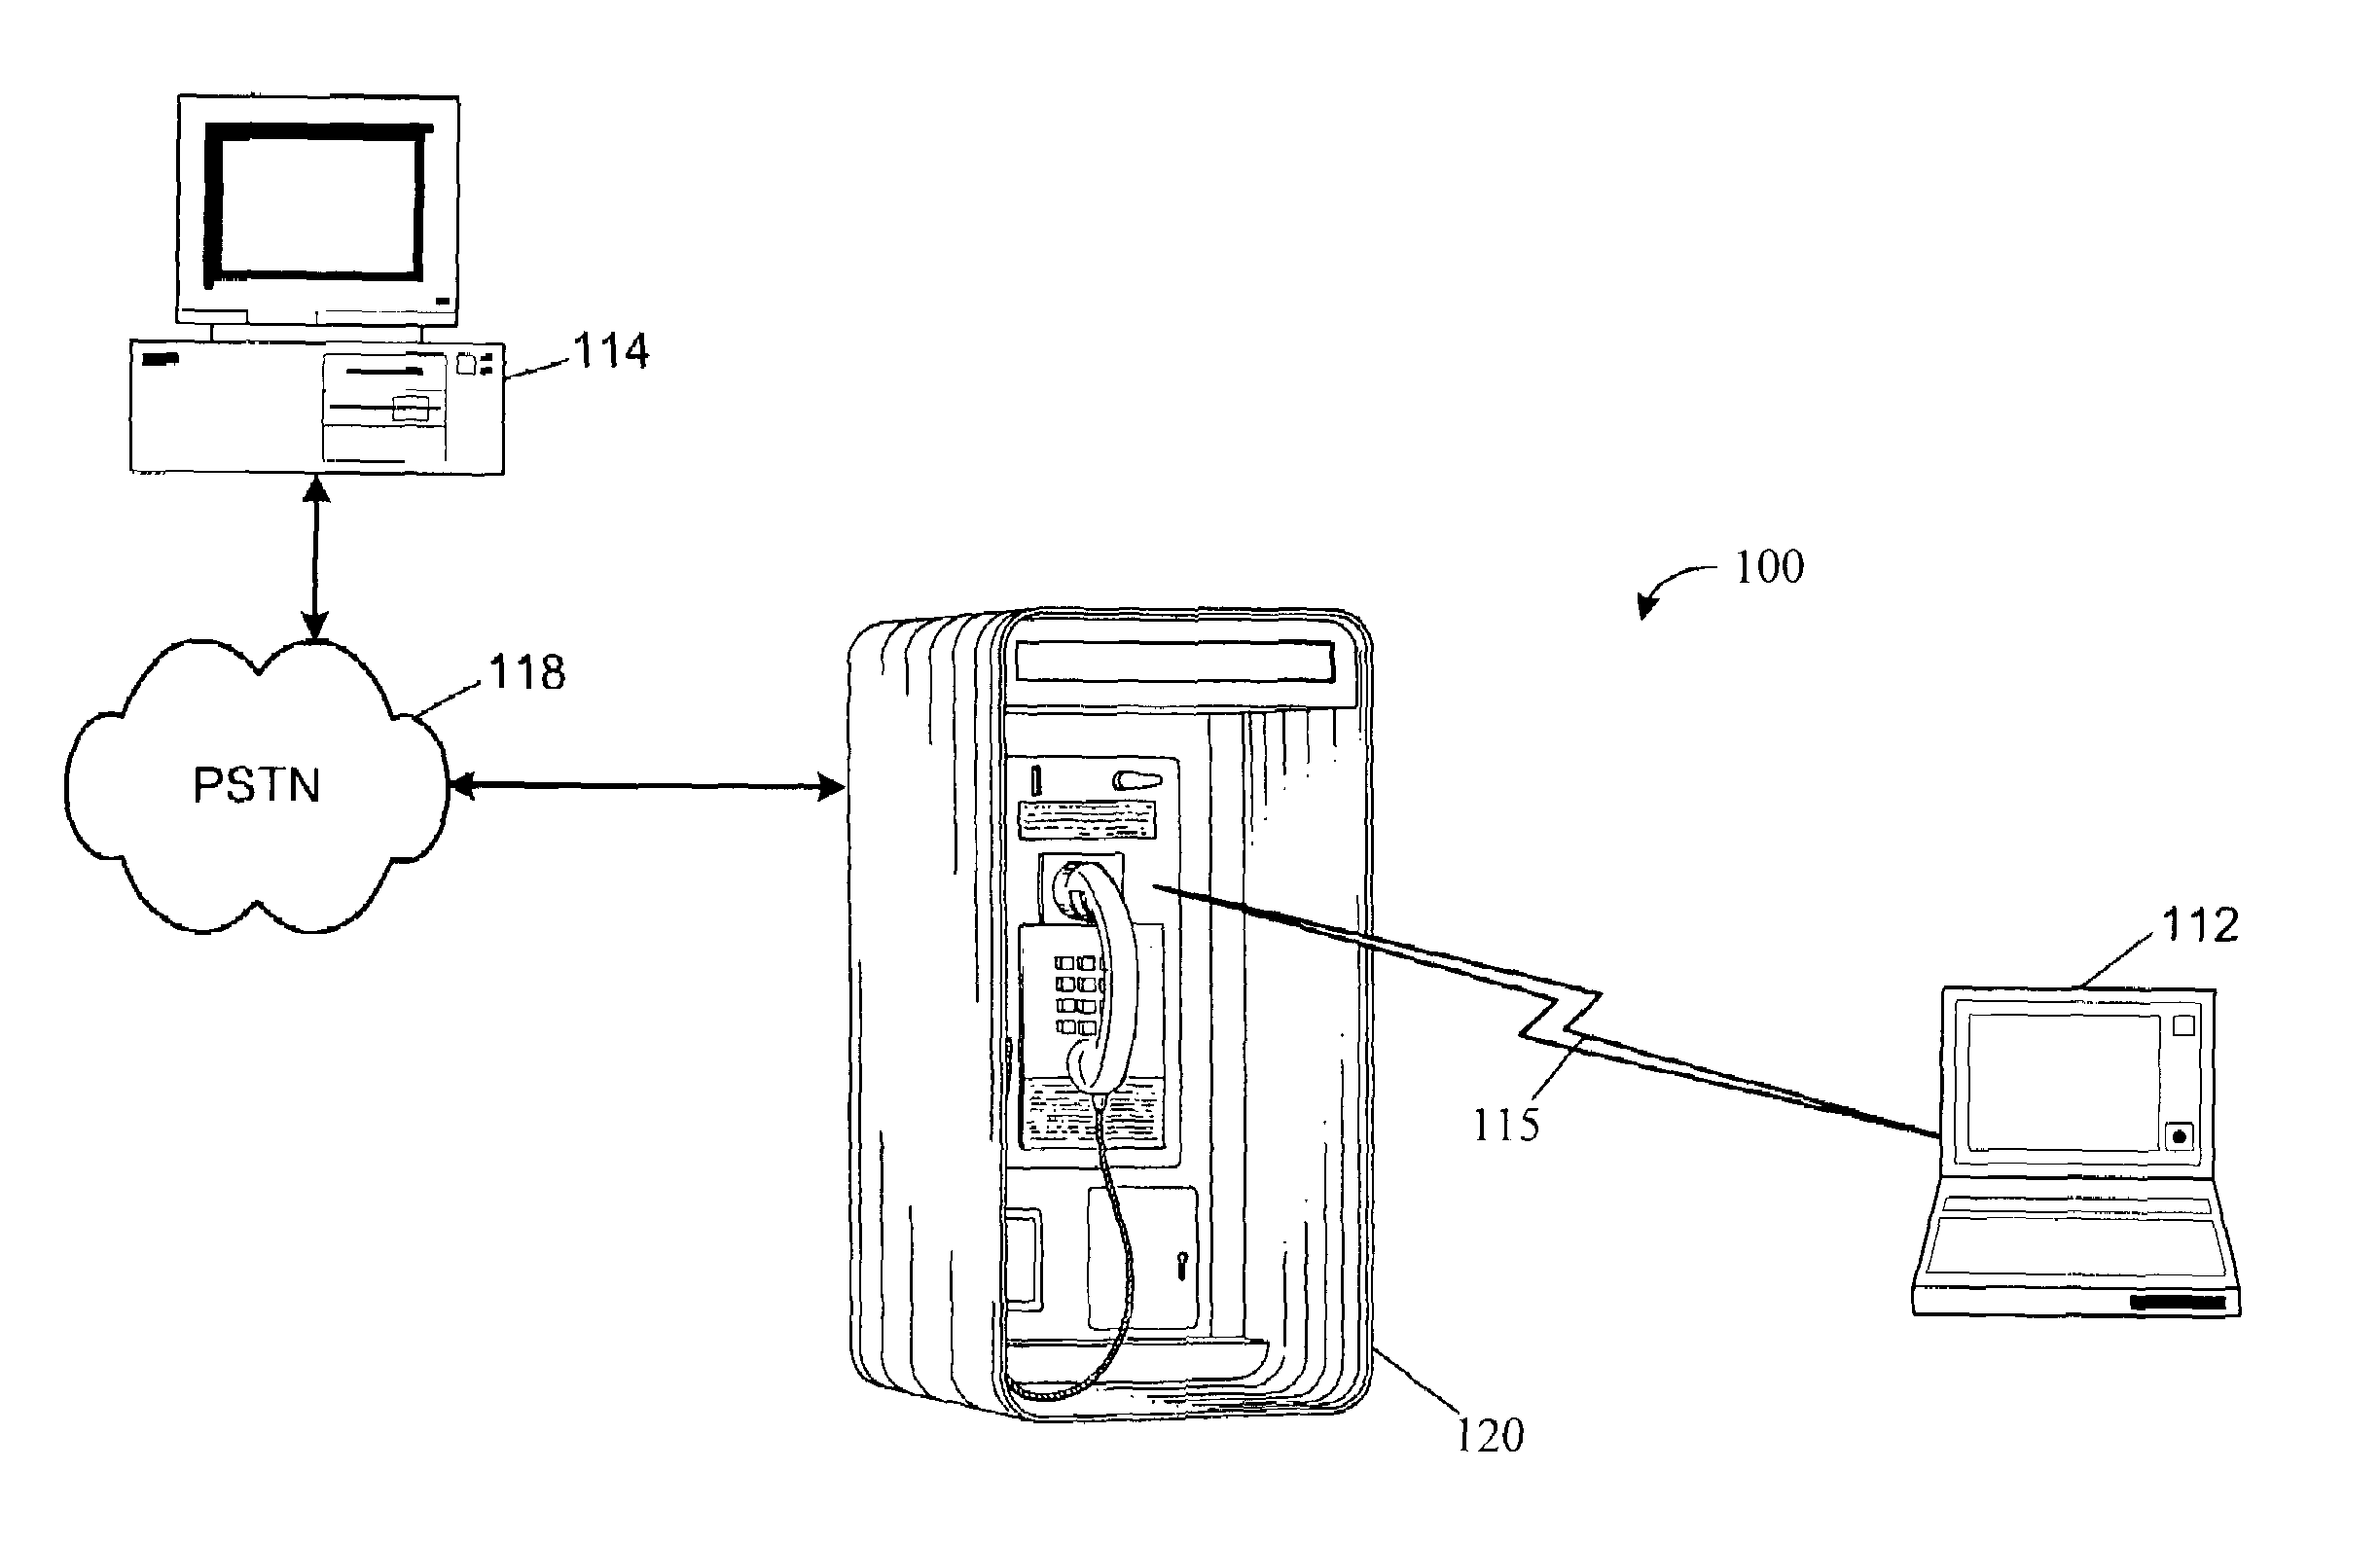 System and method for communicating with a remote communication unit via the public switched telephone network (PSTN)